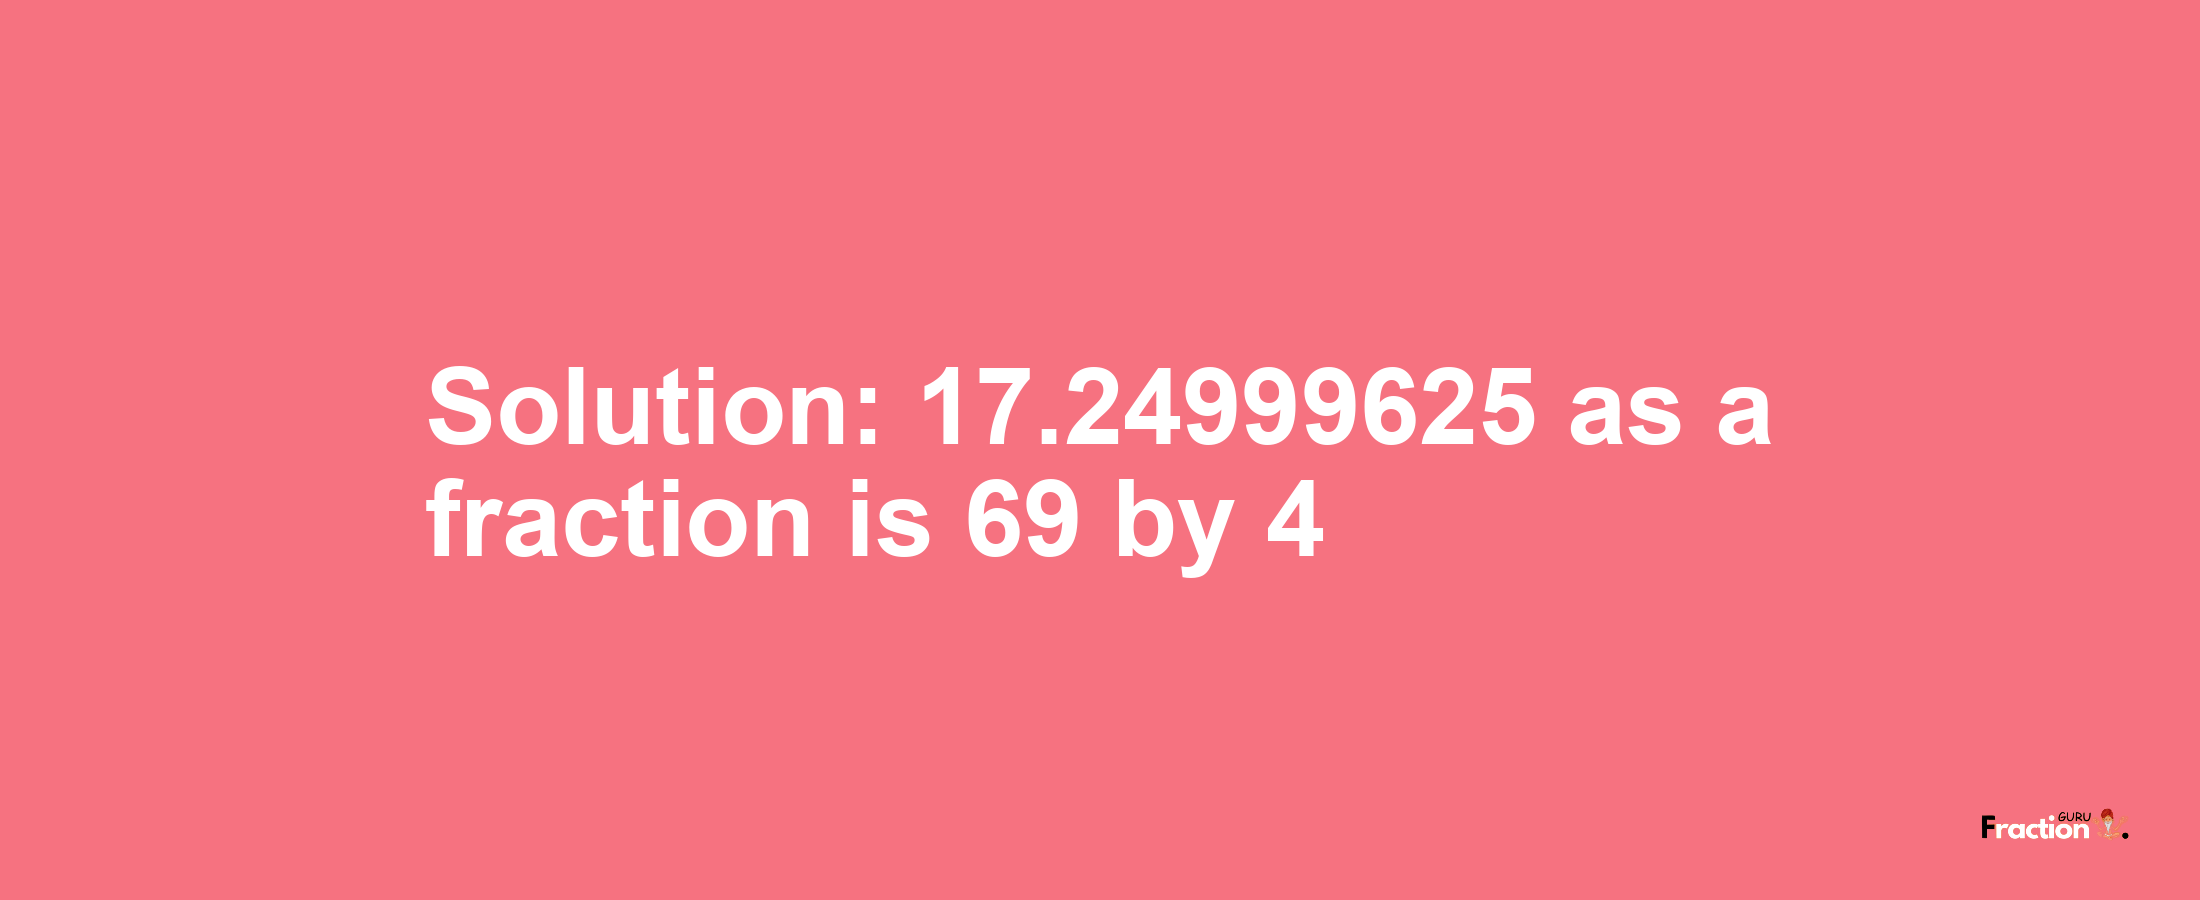 Solution:17.24999625 as a fraction is 69/4